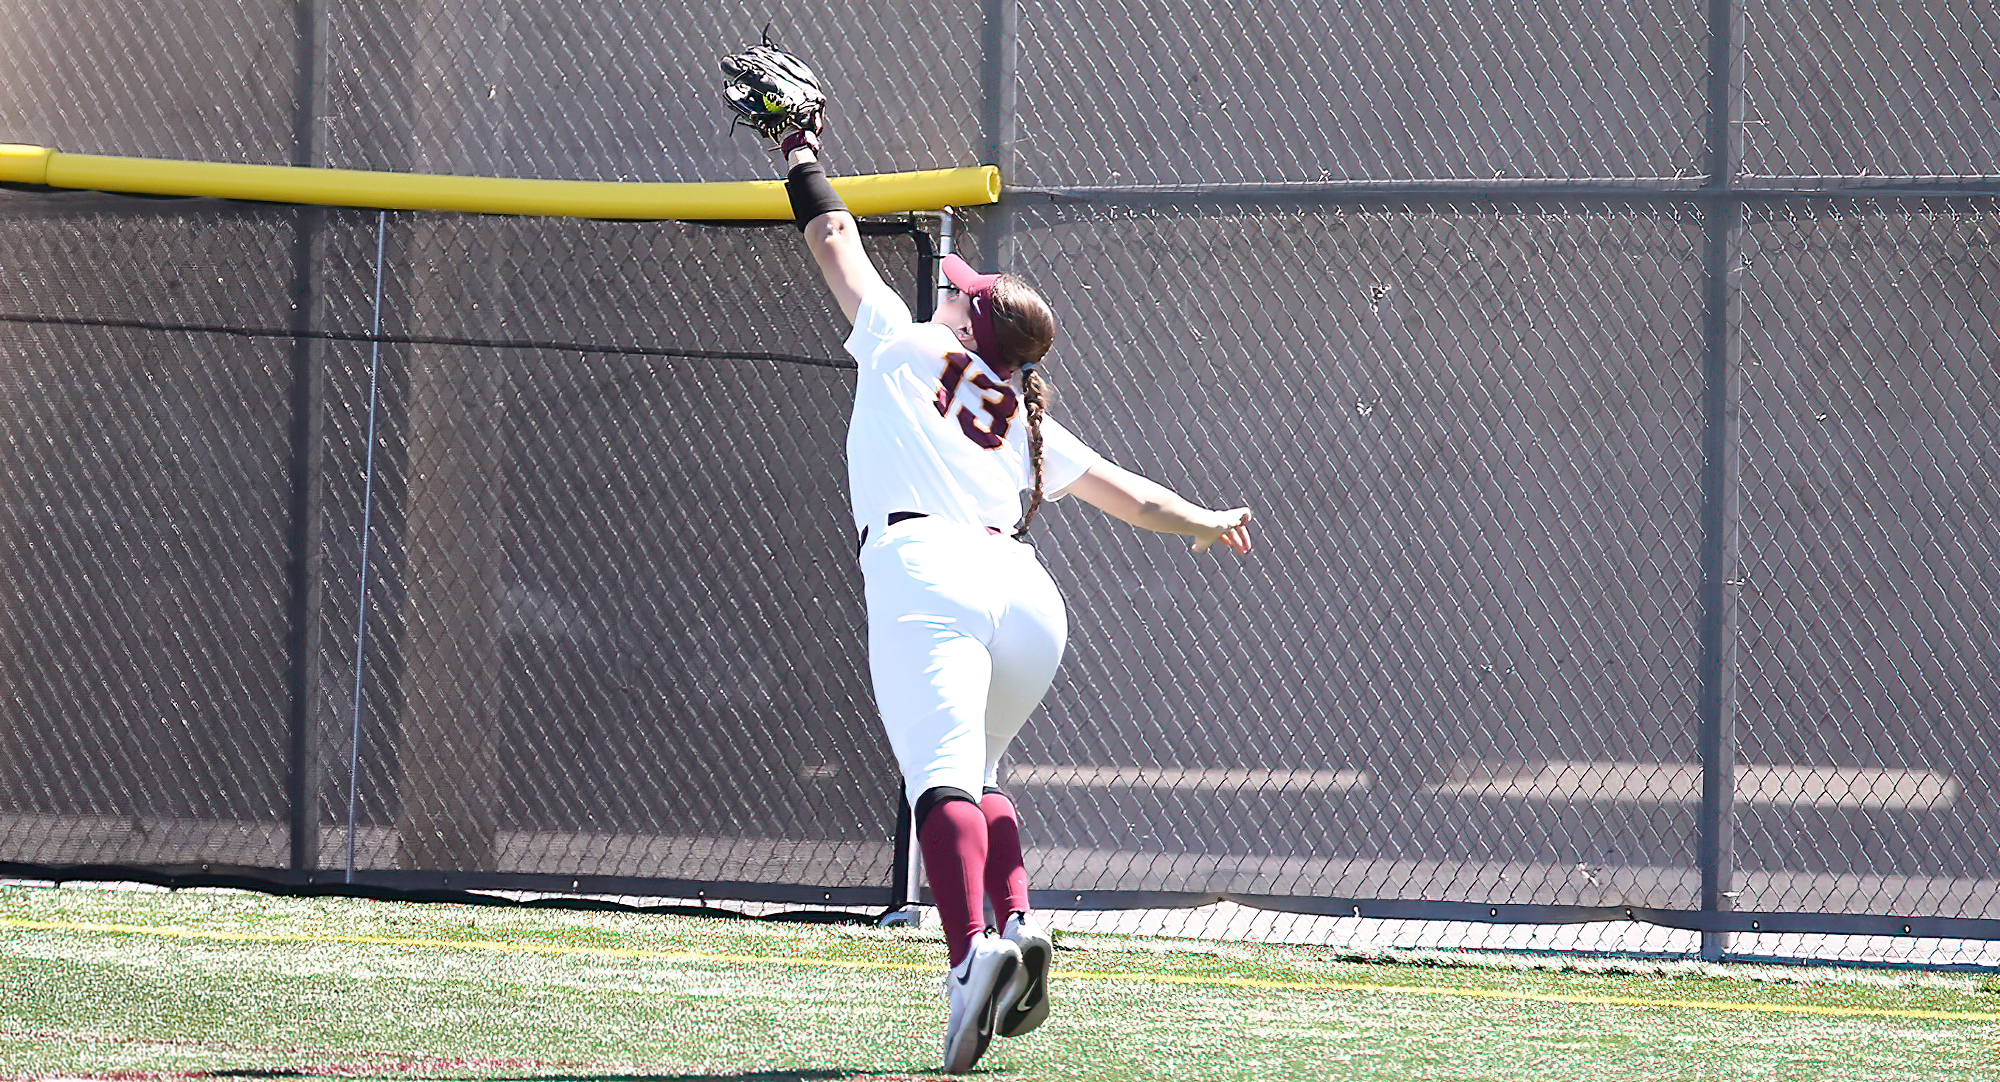 Kailee Falconer makes an over-the-shoulder catch in center field in Game 1 at Augsburg. (Photo courtesy of Ryan Coleman, D3photography).